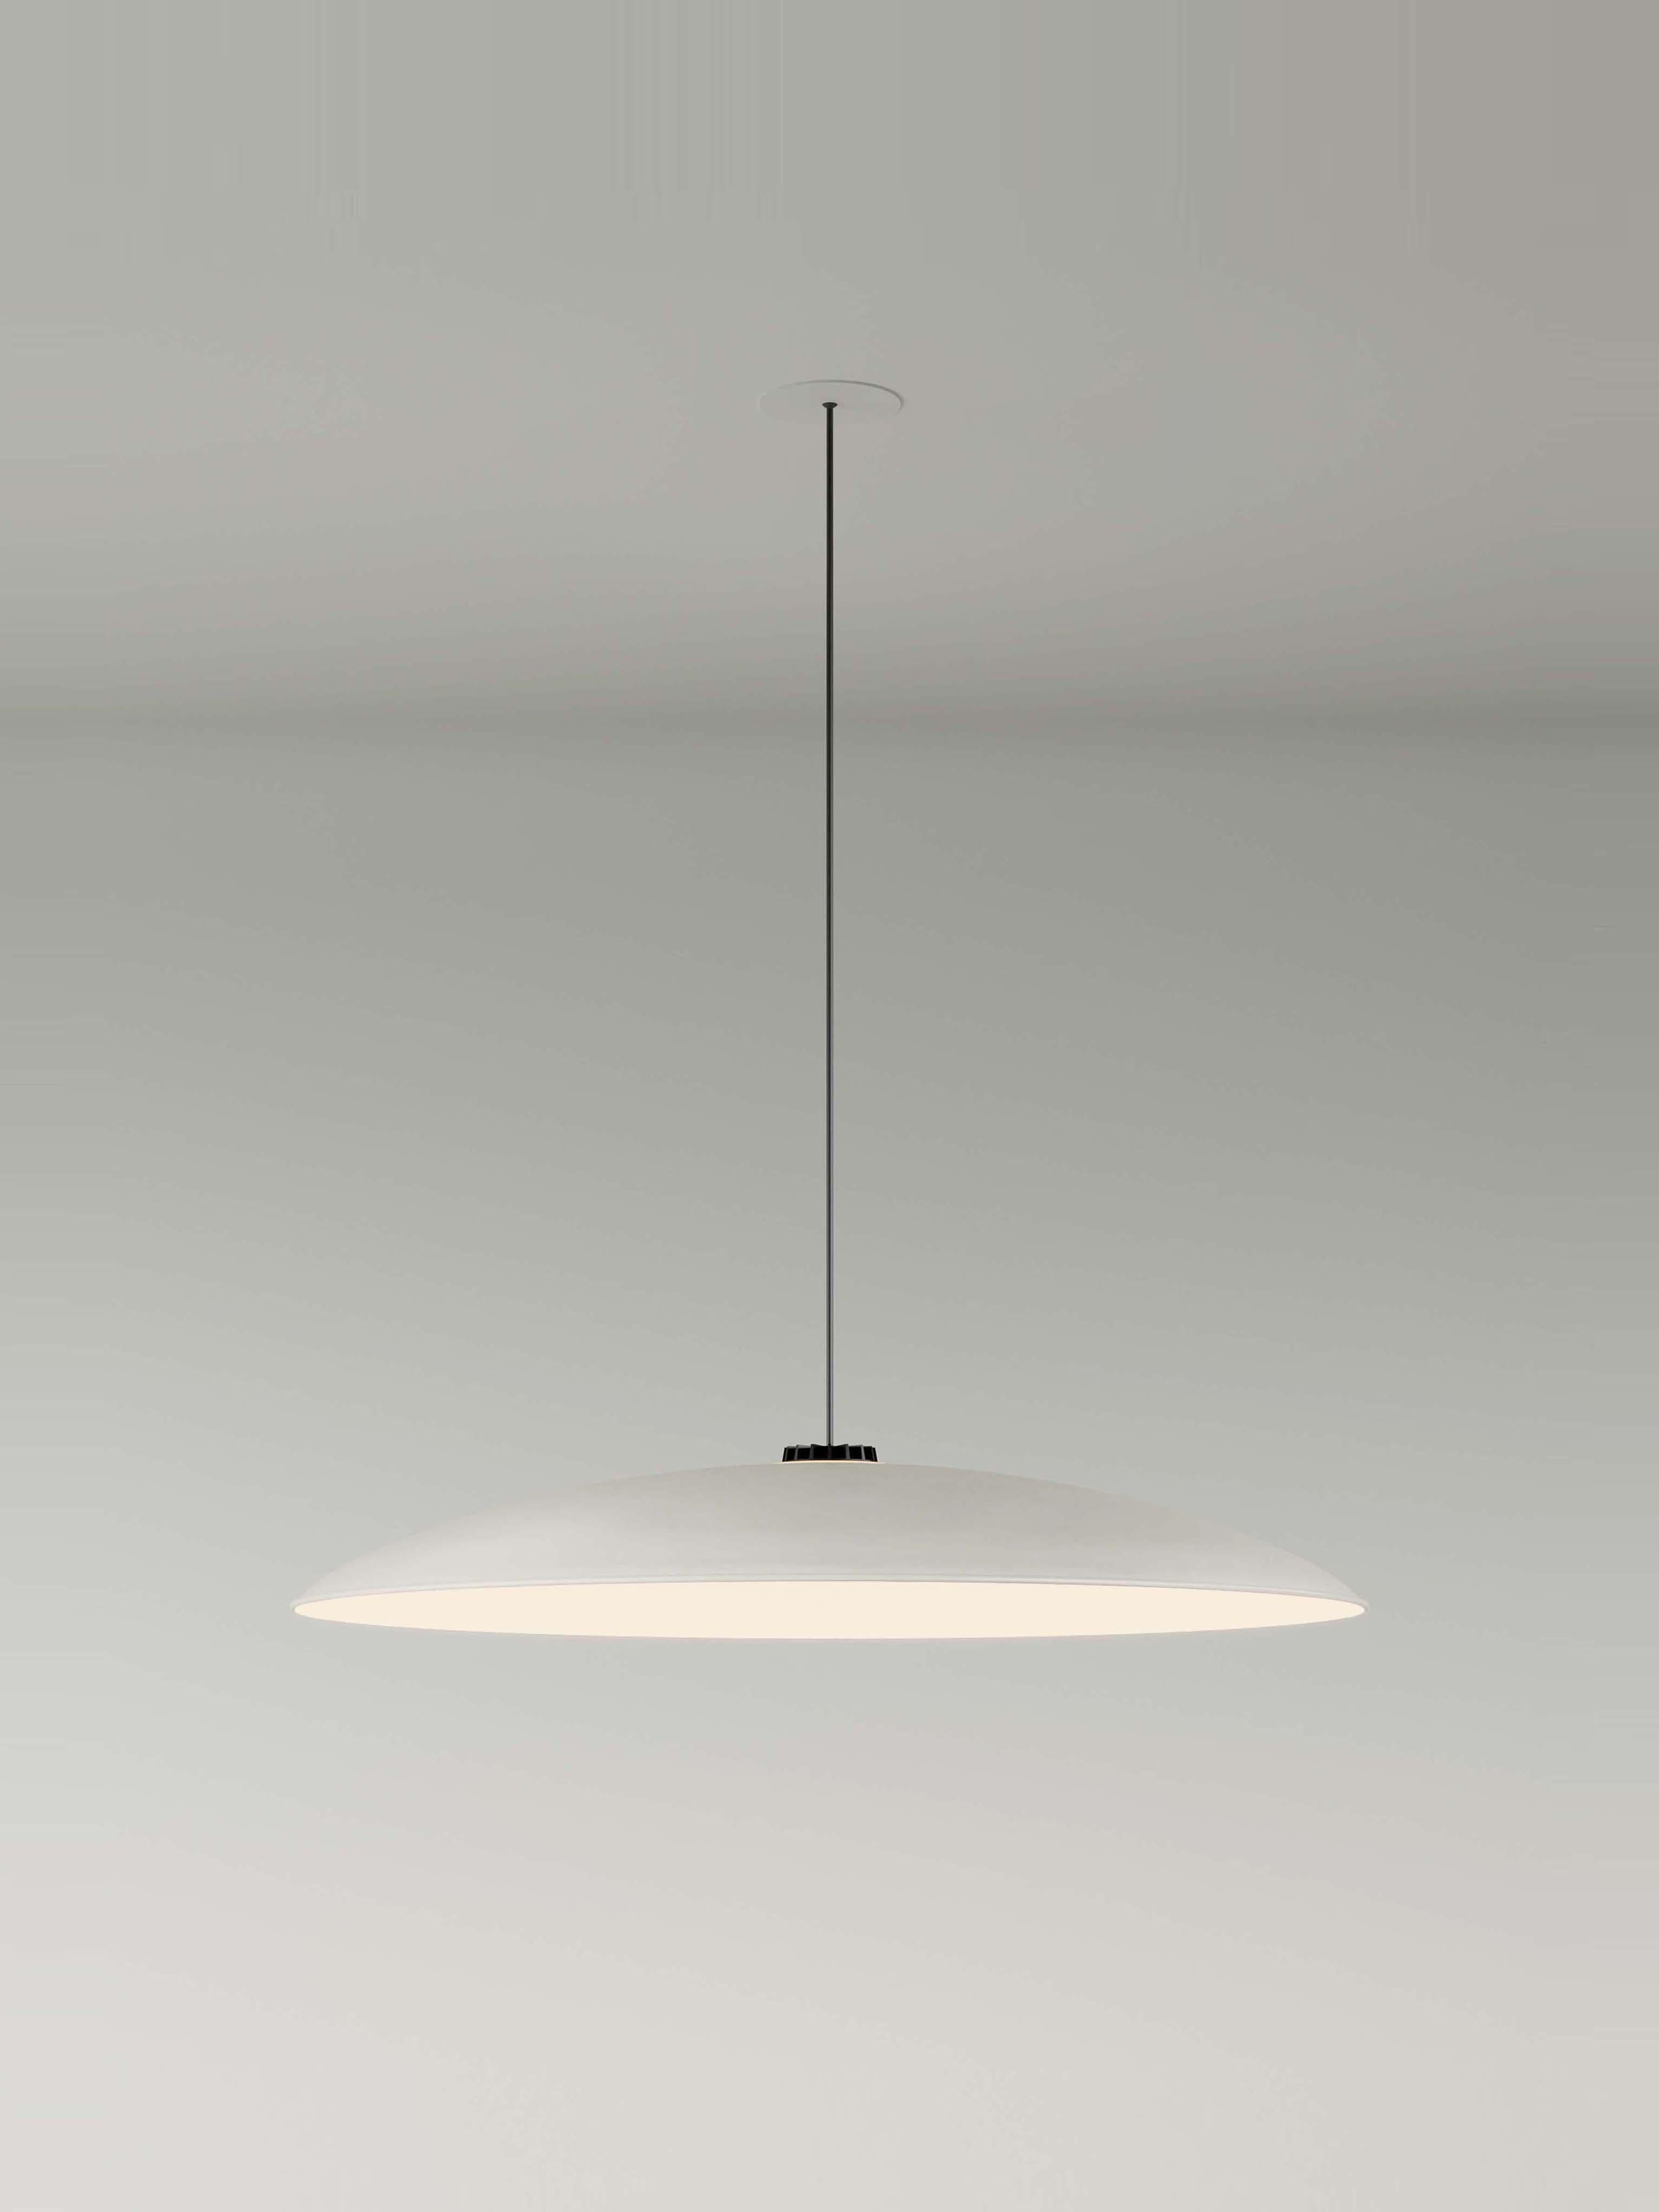 Large white headhat plate pendant lamp by Santa & Cole
Dimensions: D 75 x H 11 cm
Materials: Metal.
Cable length: 3mts.
Available in other colors and sizes. Available in 2 cable lengths: 3mts, 8mts.
Availalble in 2 canopy colors: black or